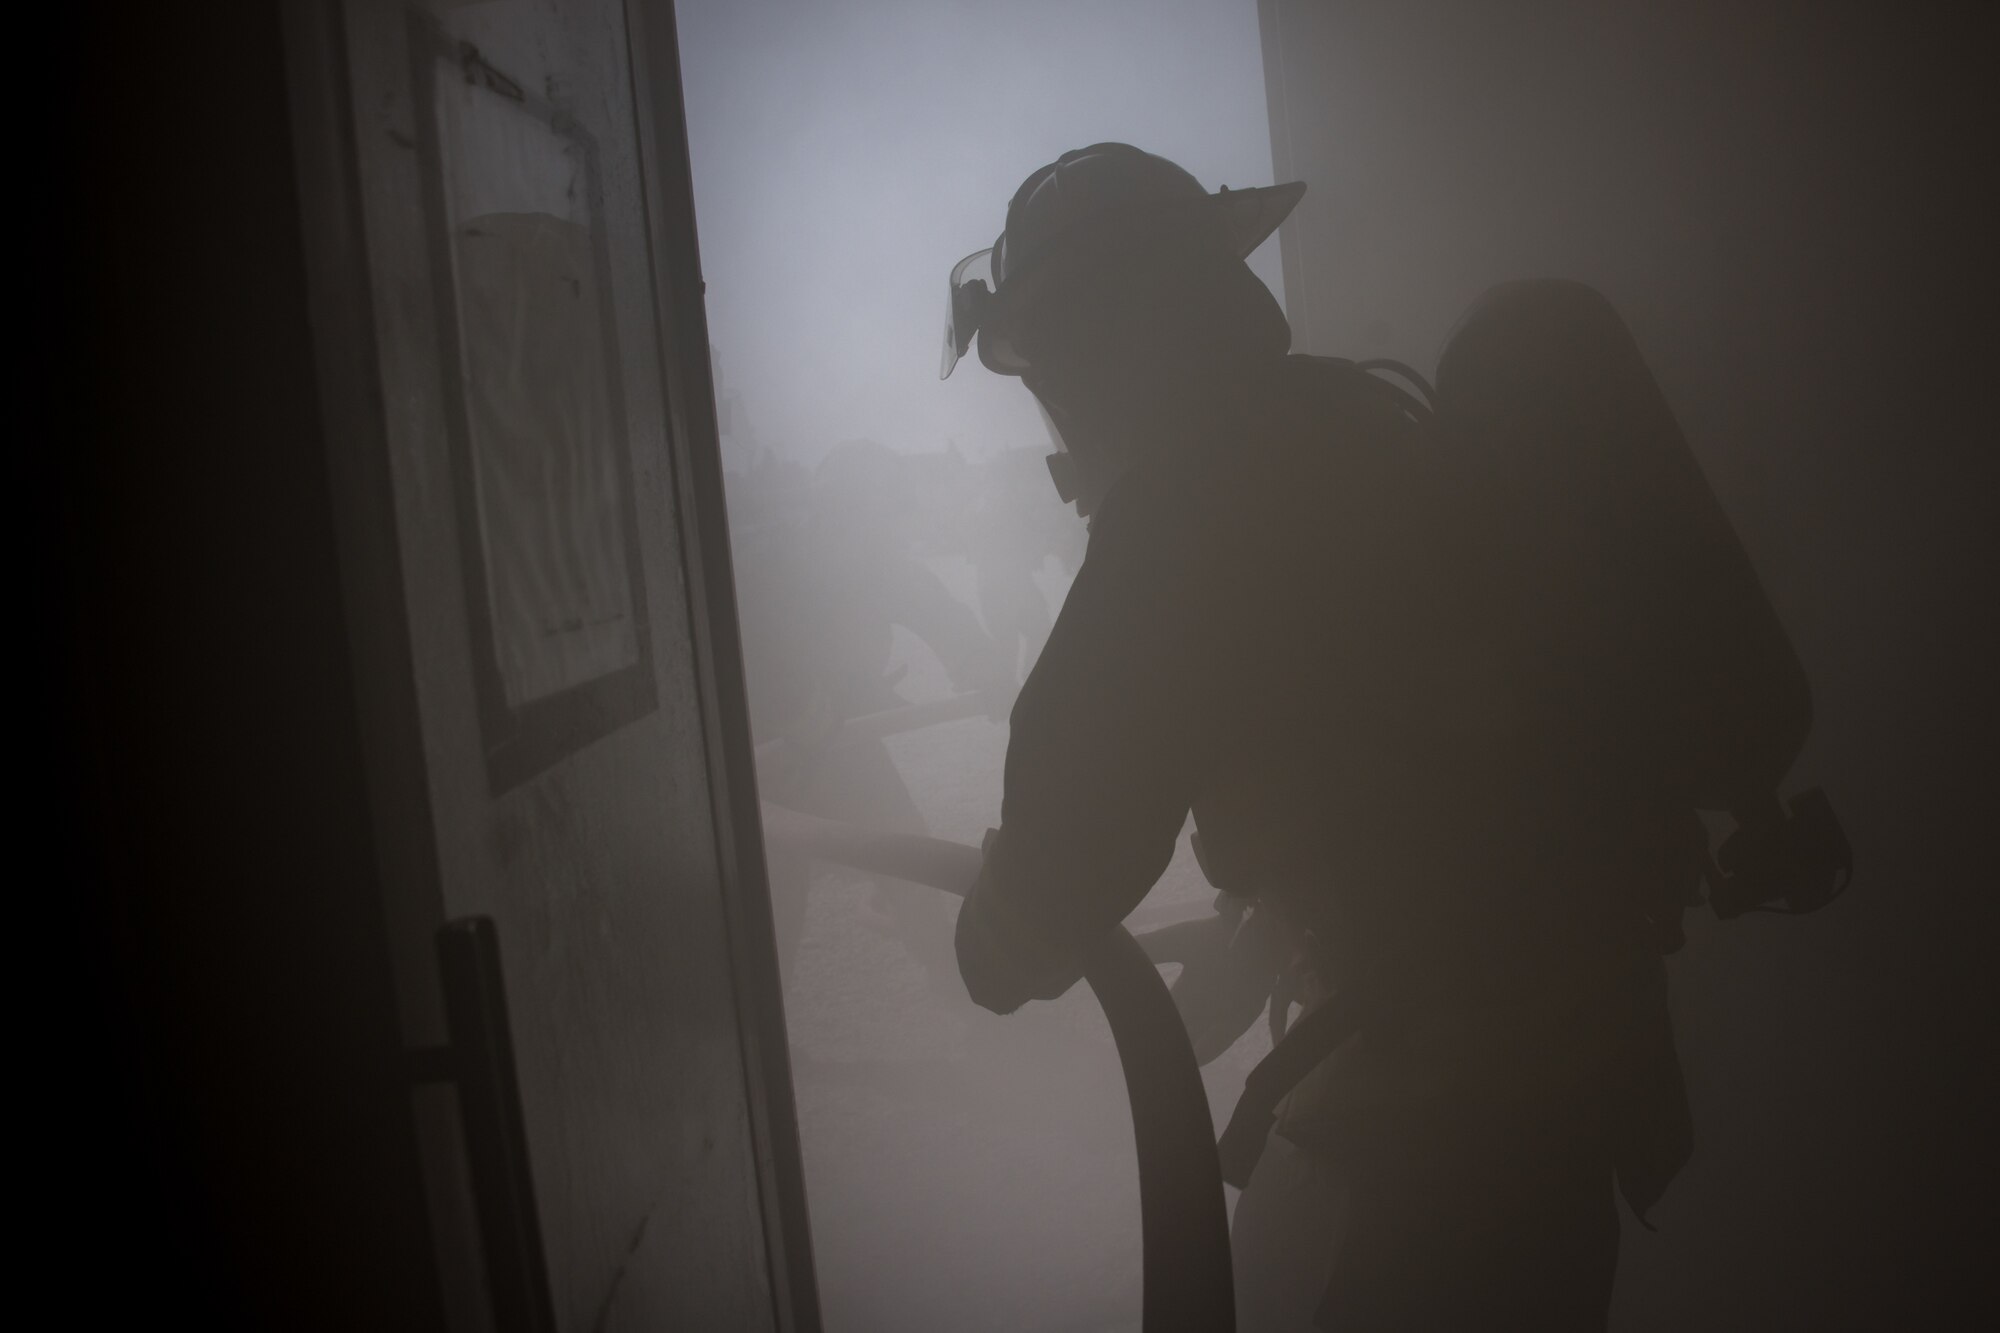 firefighter pulls a hose into a building full of smoke from a smoke machine